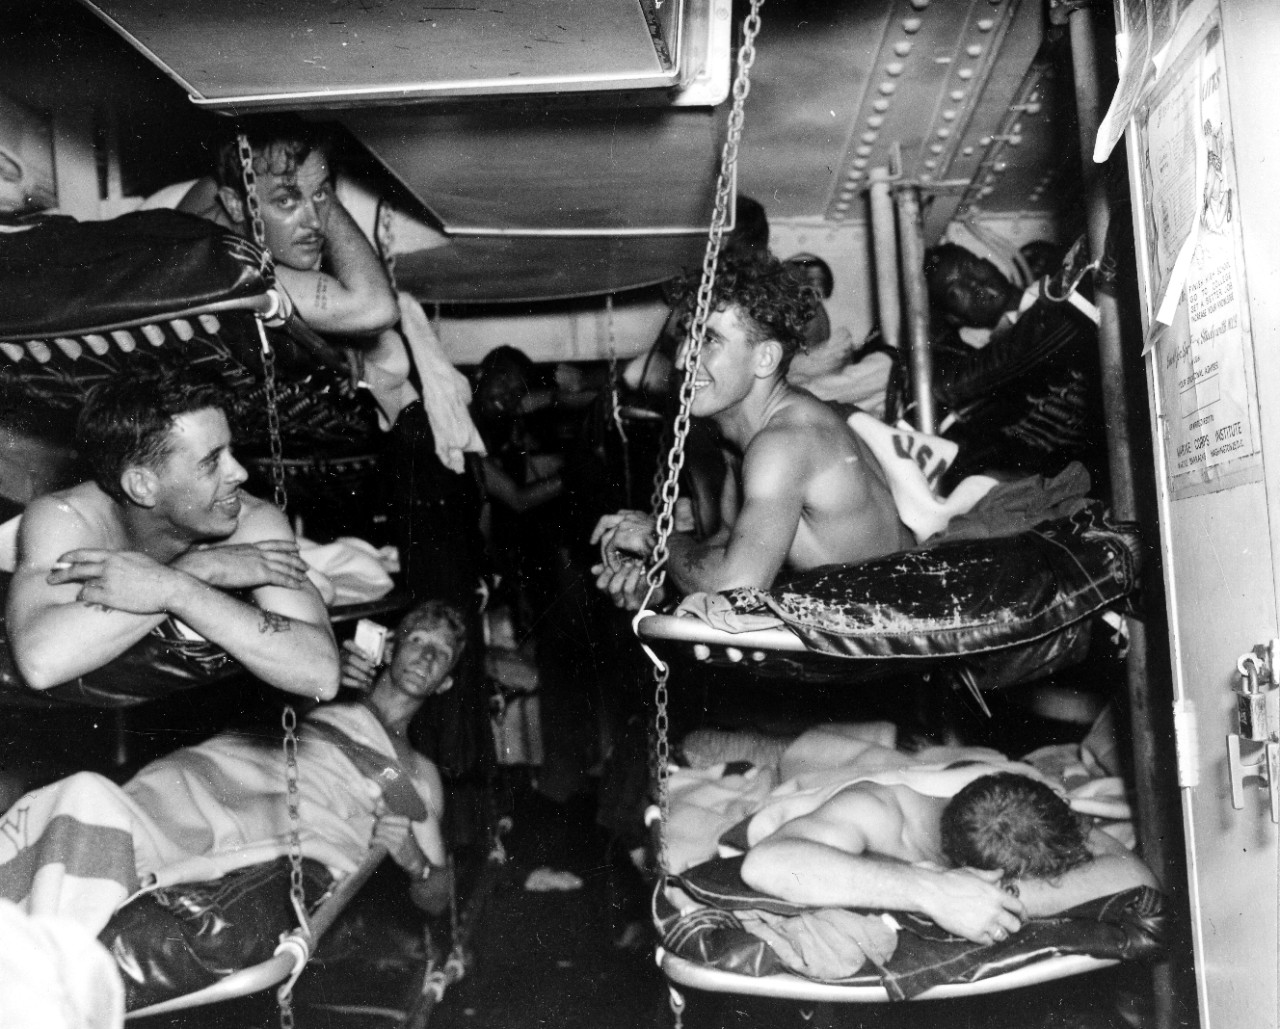 Longshaw’s sailors relax on board Salt Lake City, 18 May 1945, showing various emotions after their ordeal. (U.S. Navy Photograph 80-G-343592, National Archives and Records Administration, Still Pictures Division, College Park, Md.)